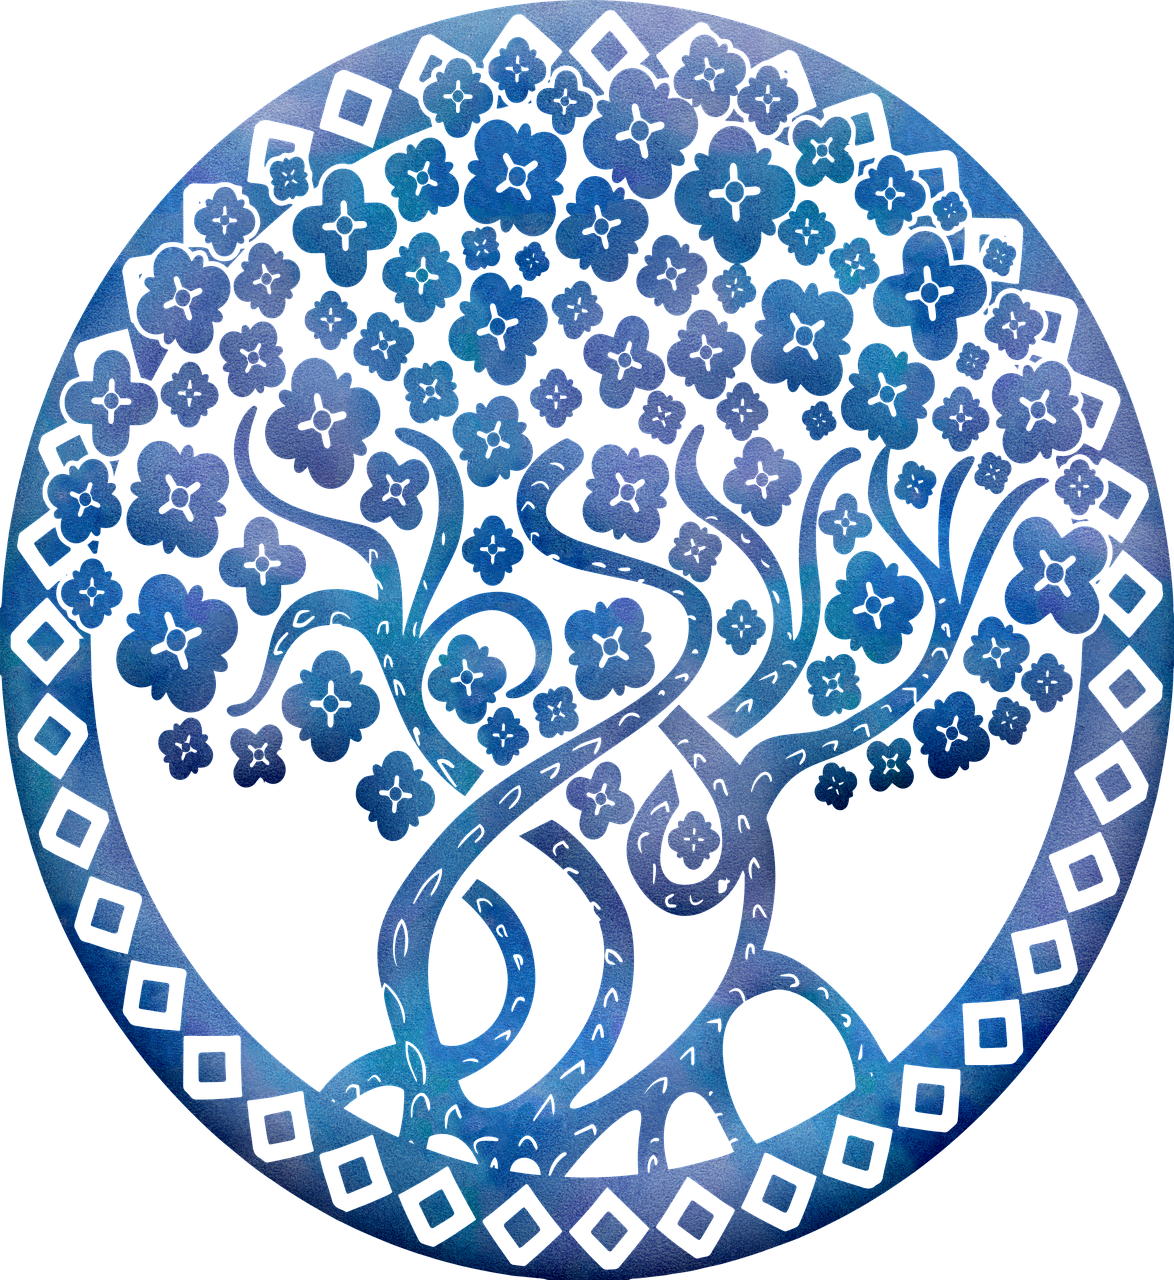 a picture of a tree of life in a circle, a digital rendering, cloisonnism, blue and black color scheme)), carved, very peaceful mood, stylized silhouette